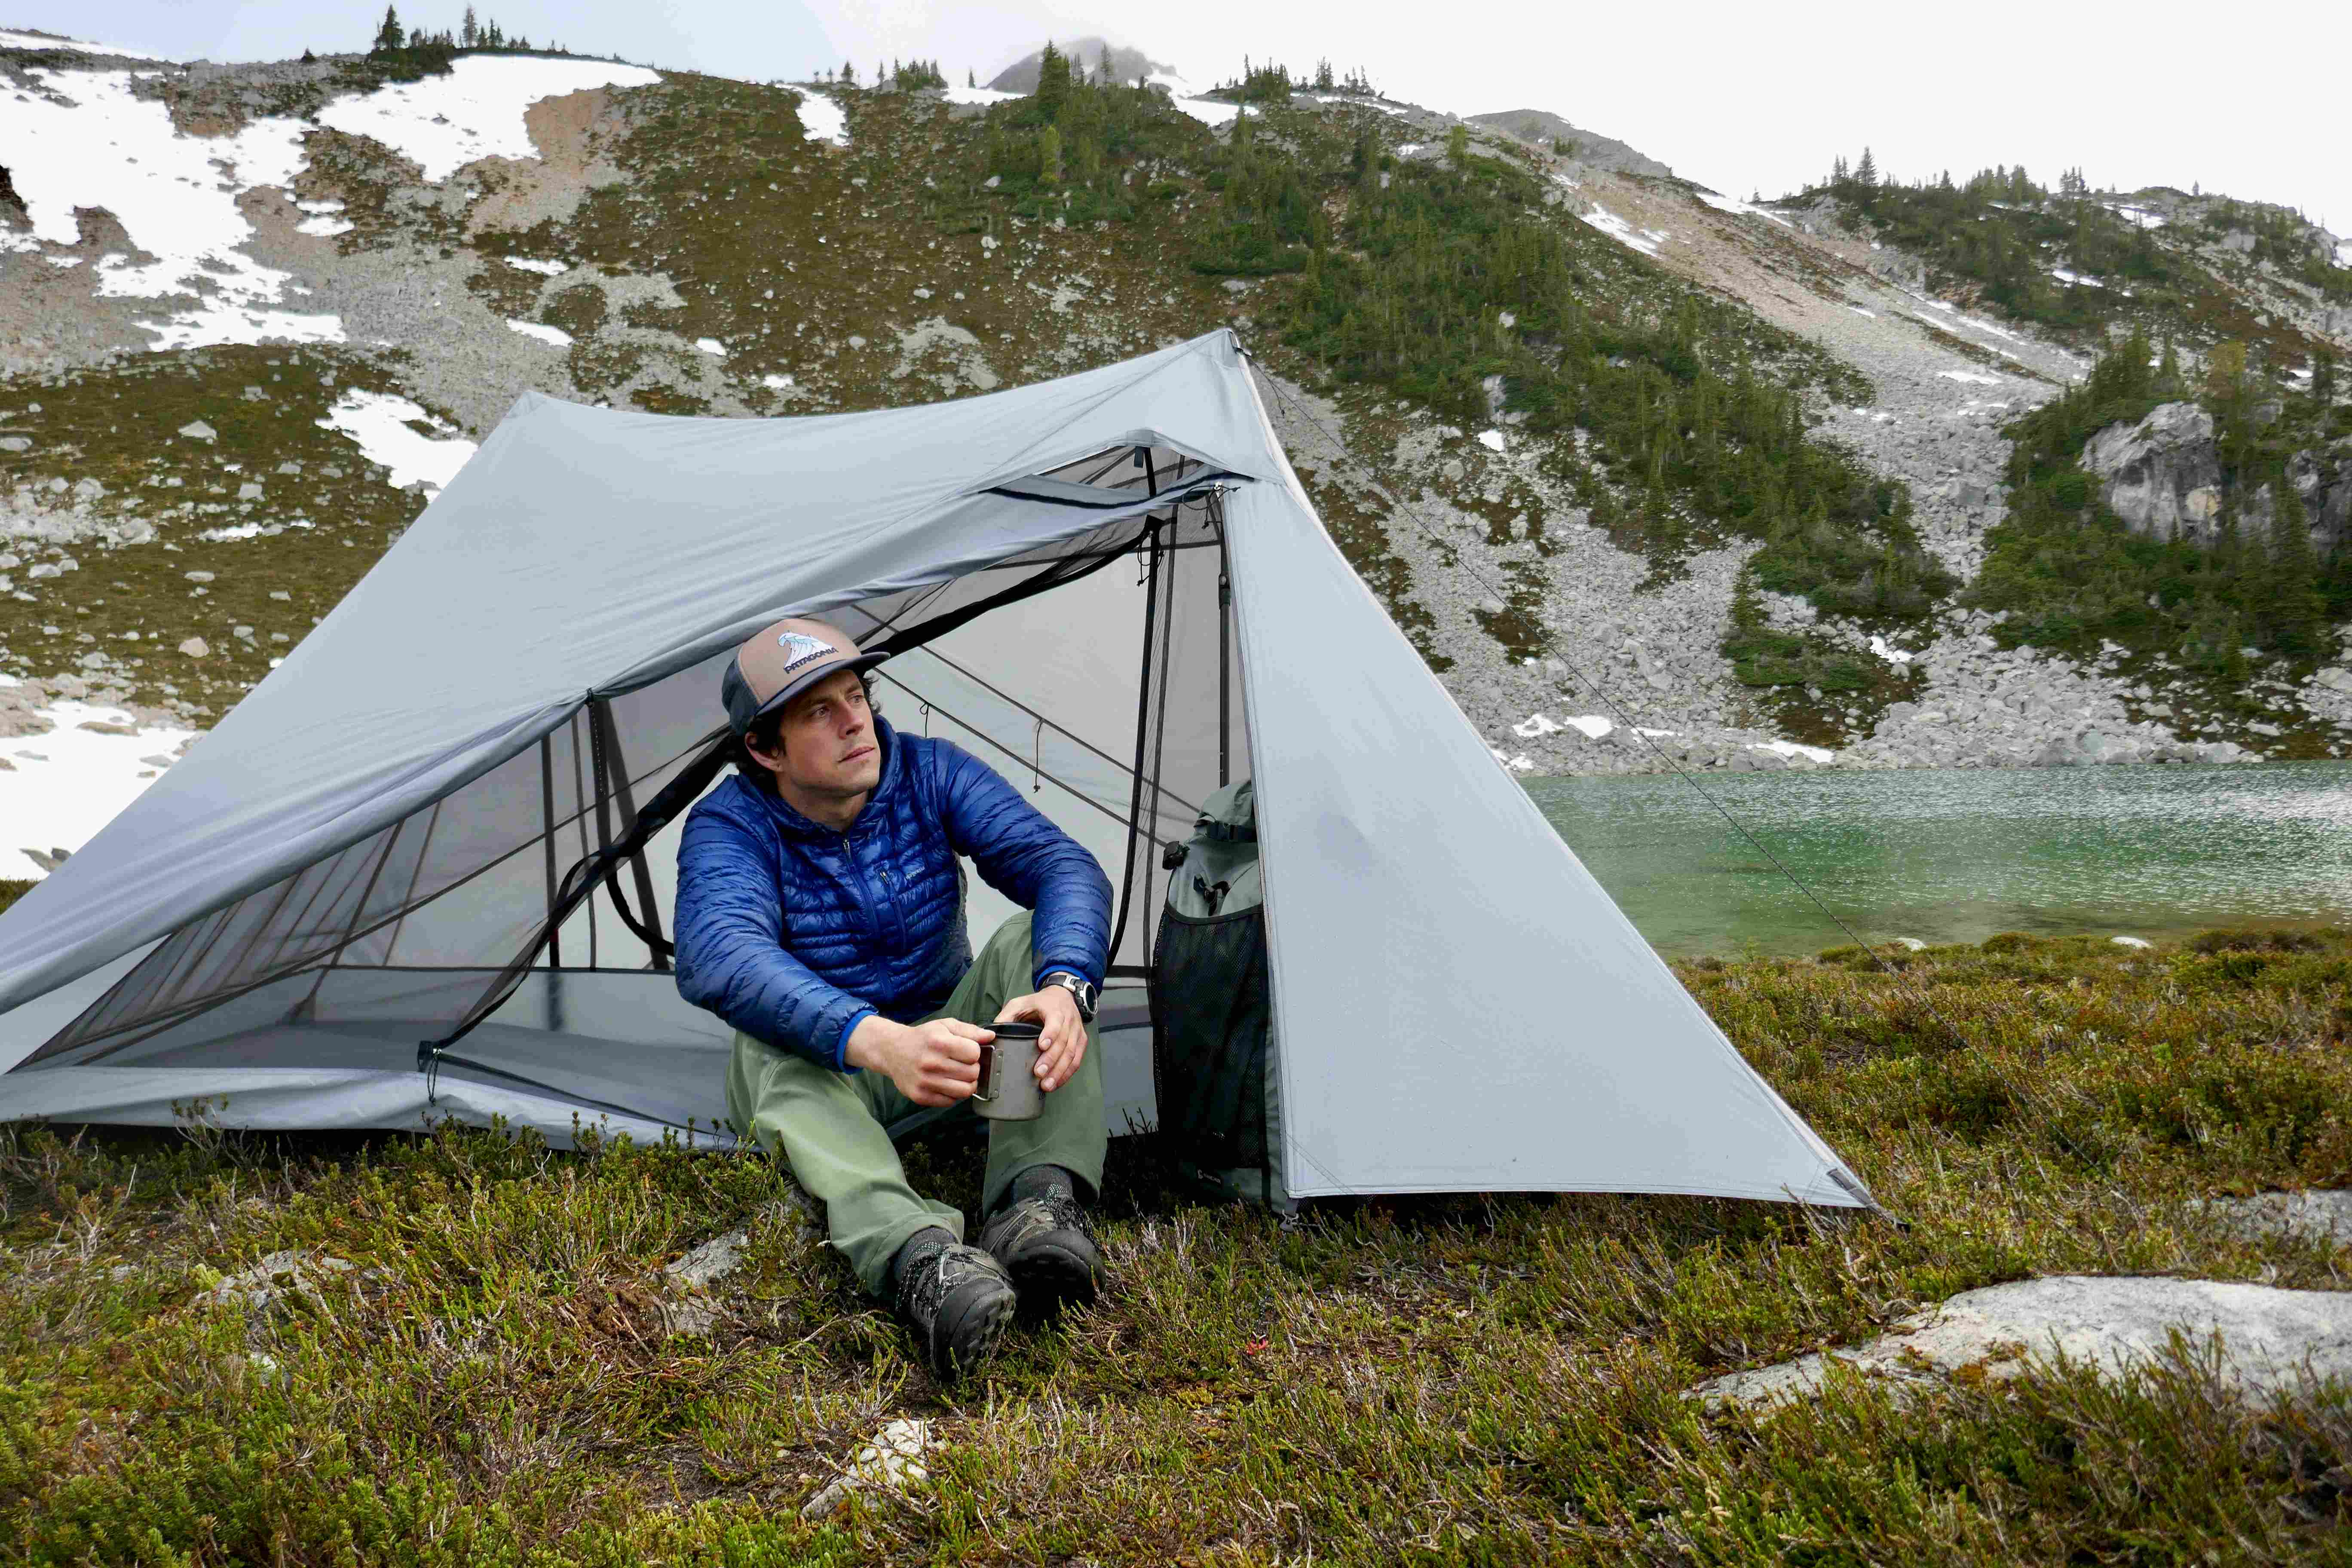 A man holding a coffee mug sits in a unique looking dyneema tent in the mountains. The tent is on a patch of grass by a 